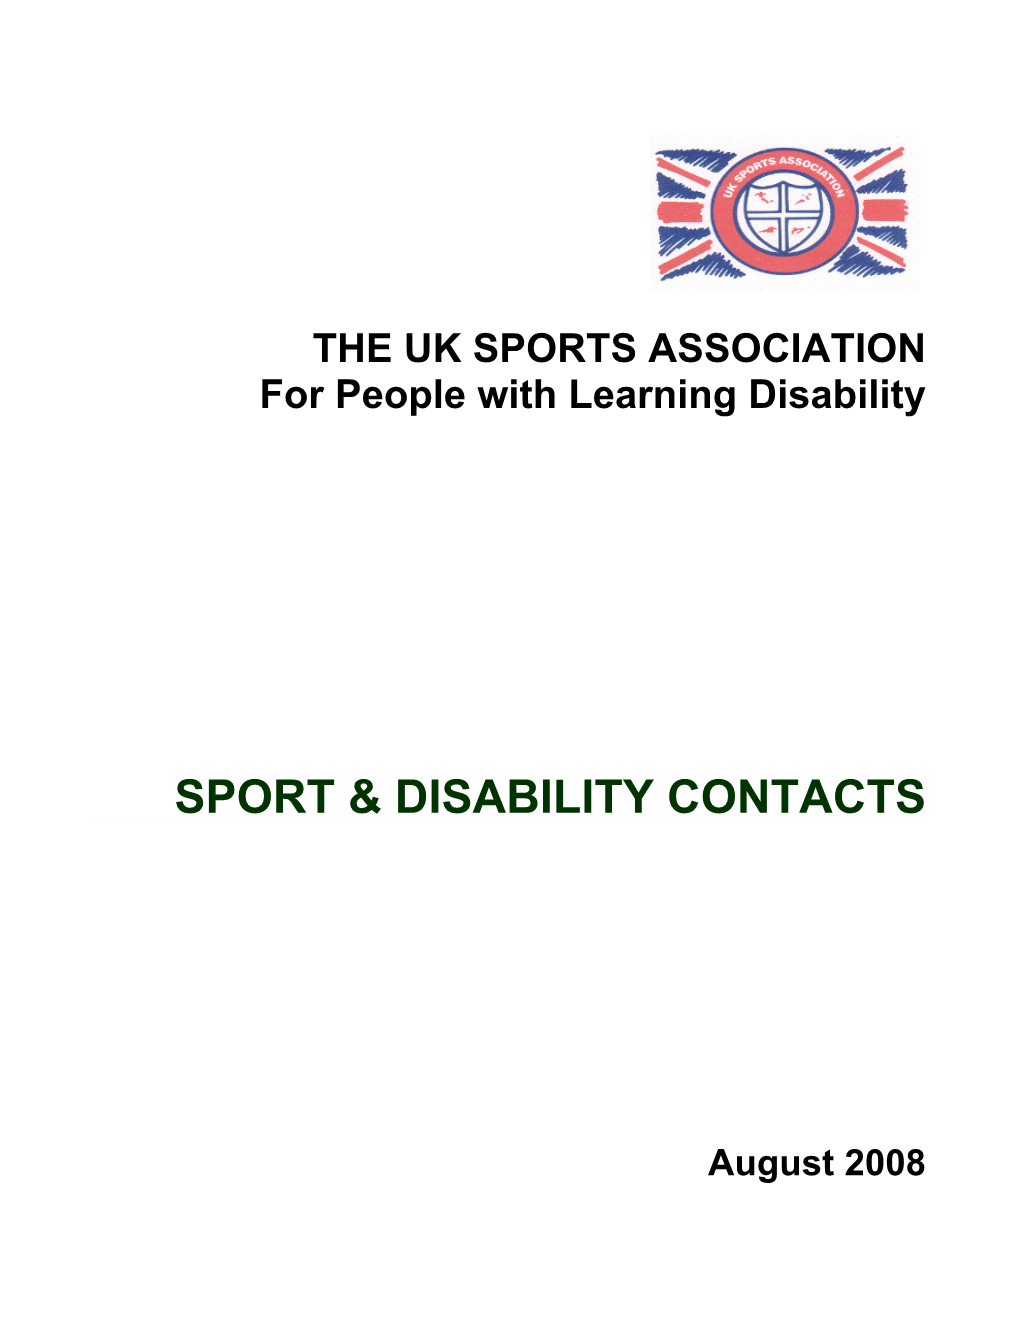 Directory of Sport & Disability Contacts